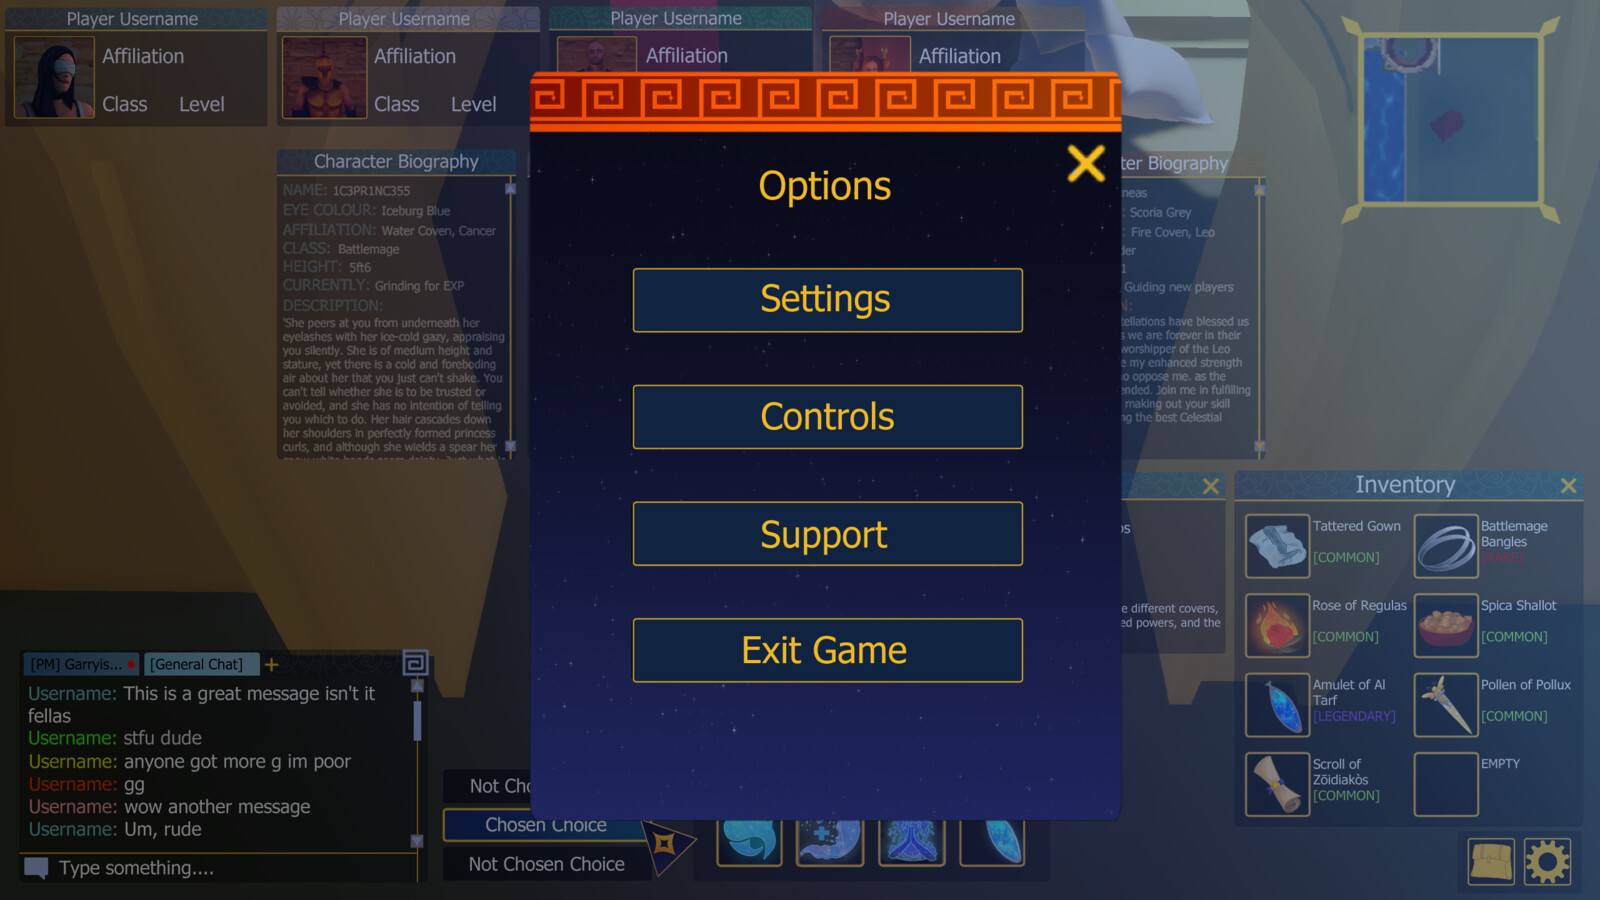 ESC menu. This would also pop up if the player clicks on the settings icon in the bottom right of the screen. 